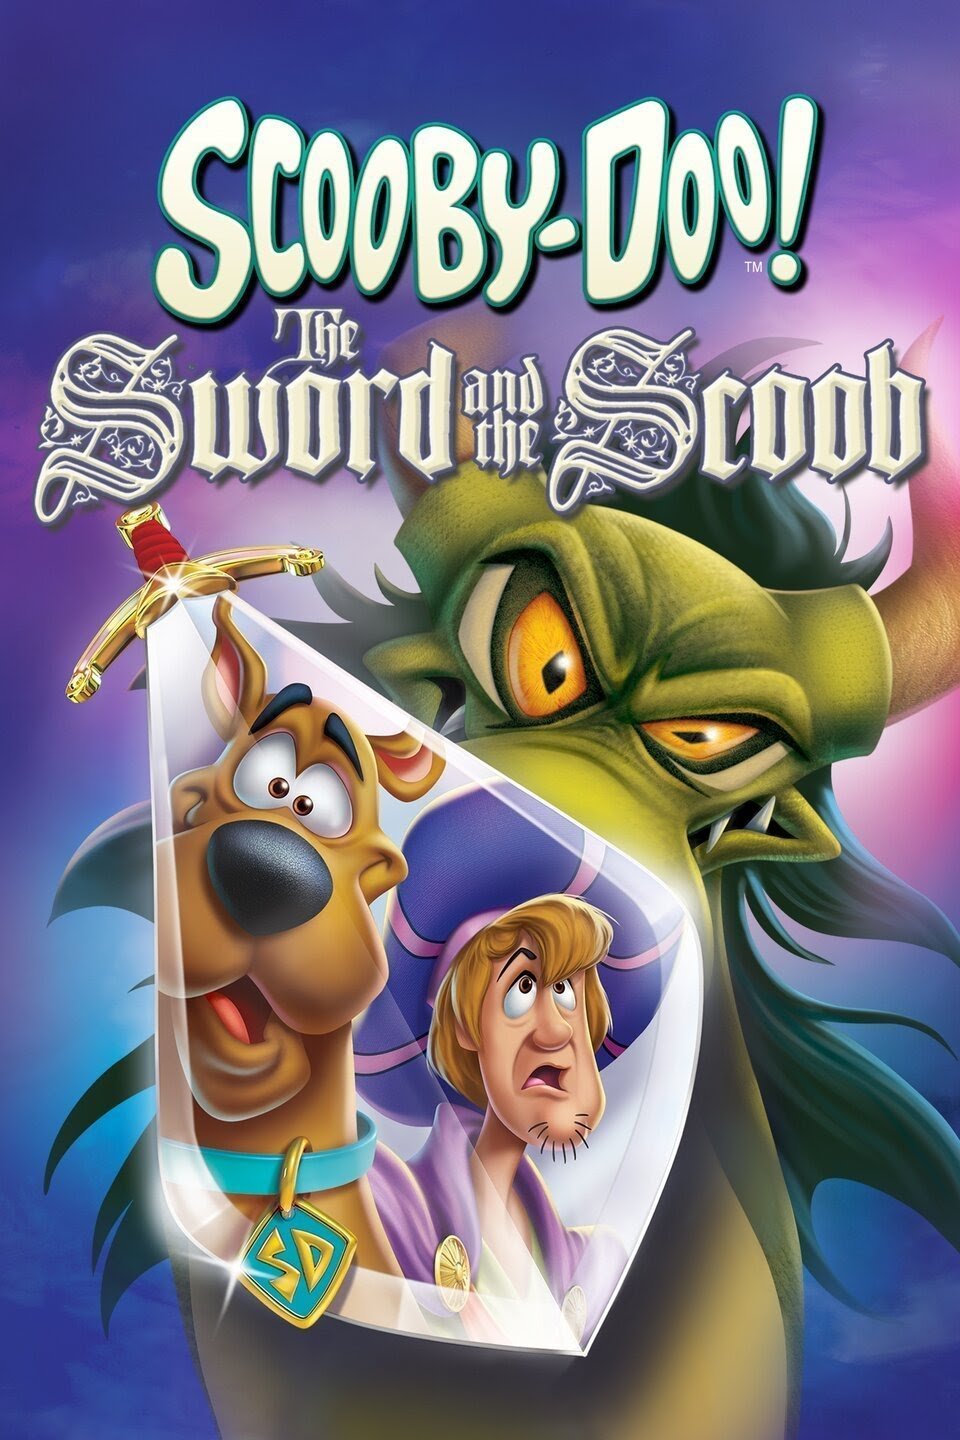 L'affiche du film Scooby-Doo! The Sword and the Scoob